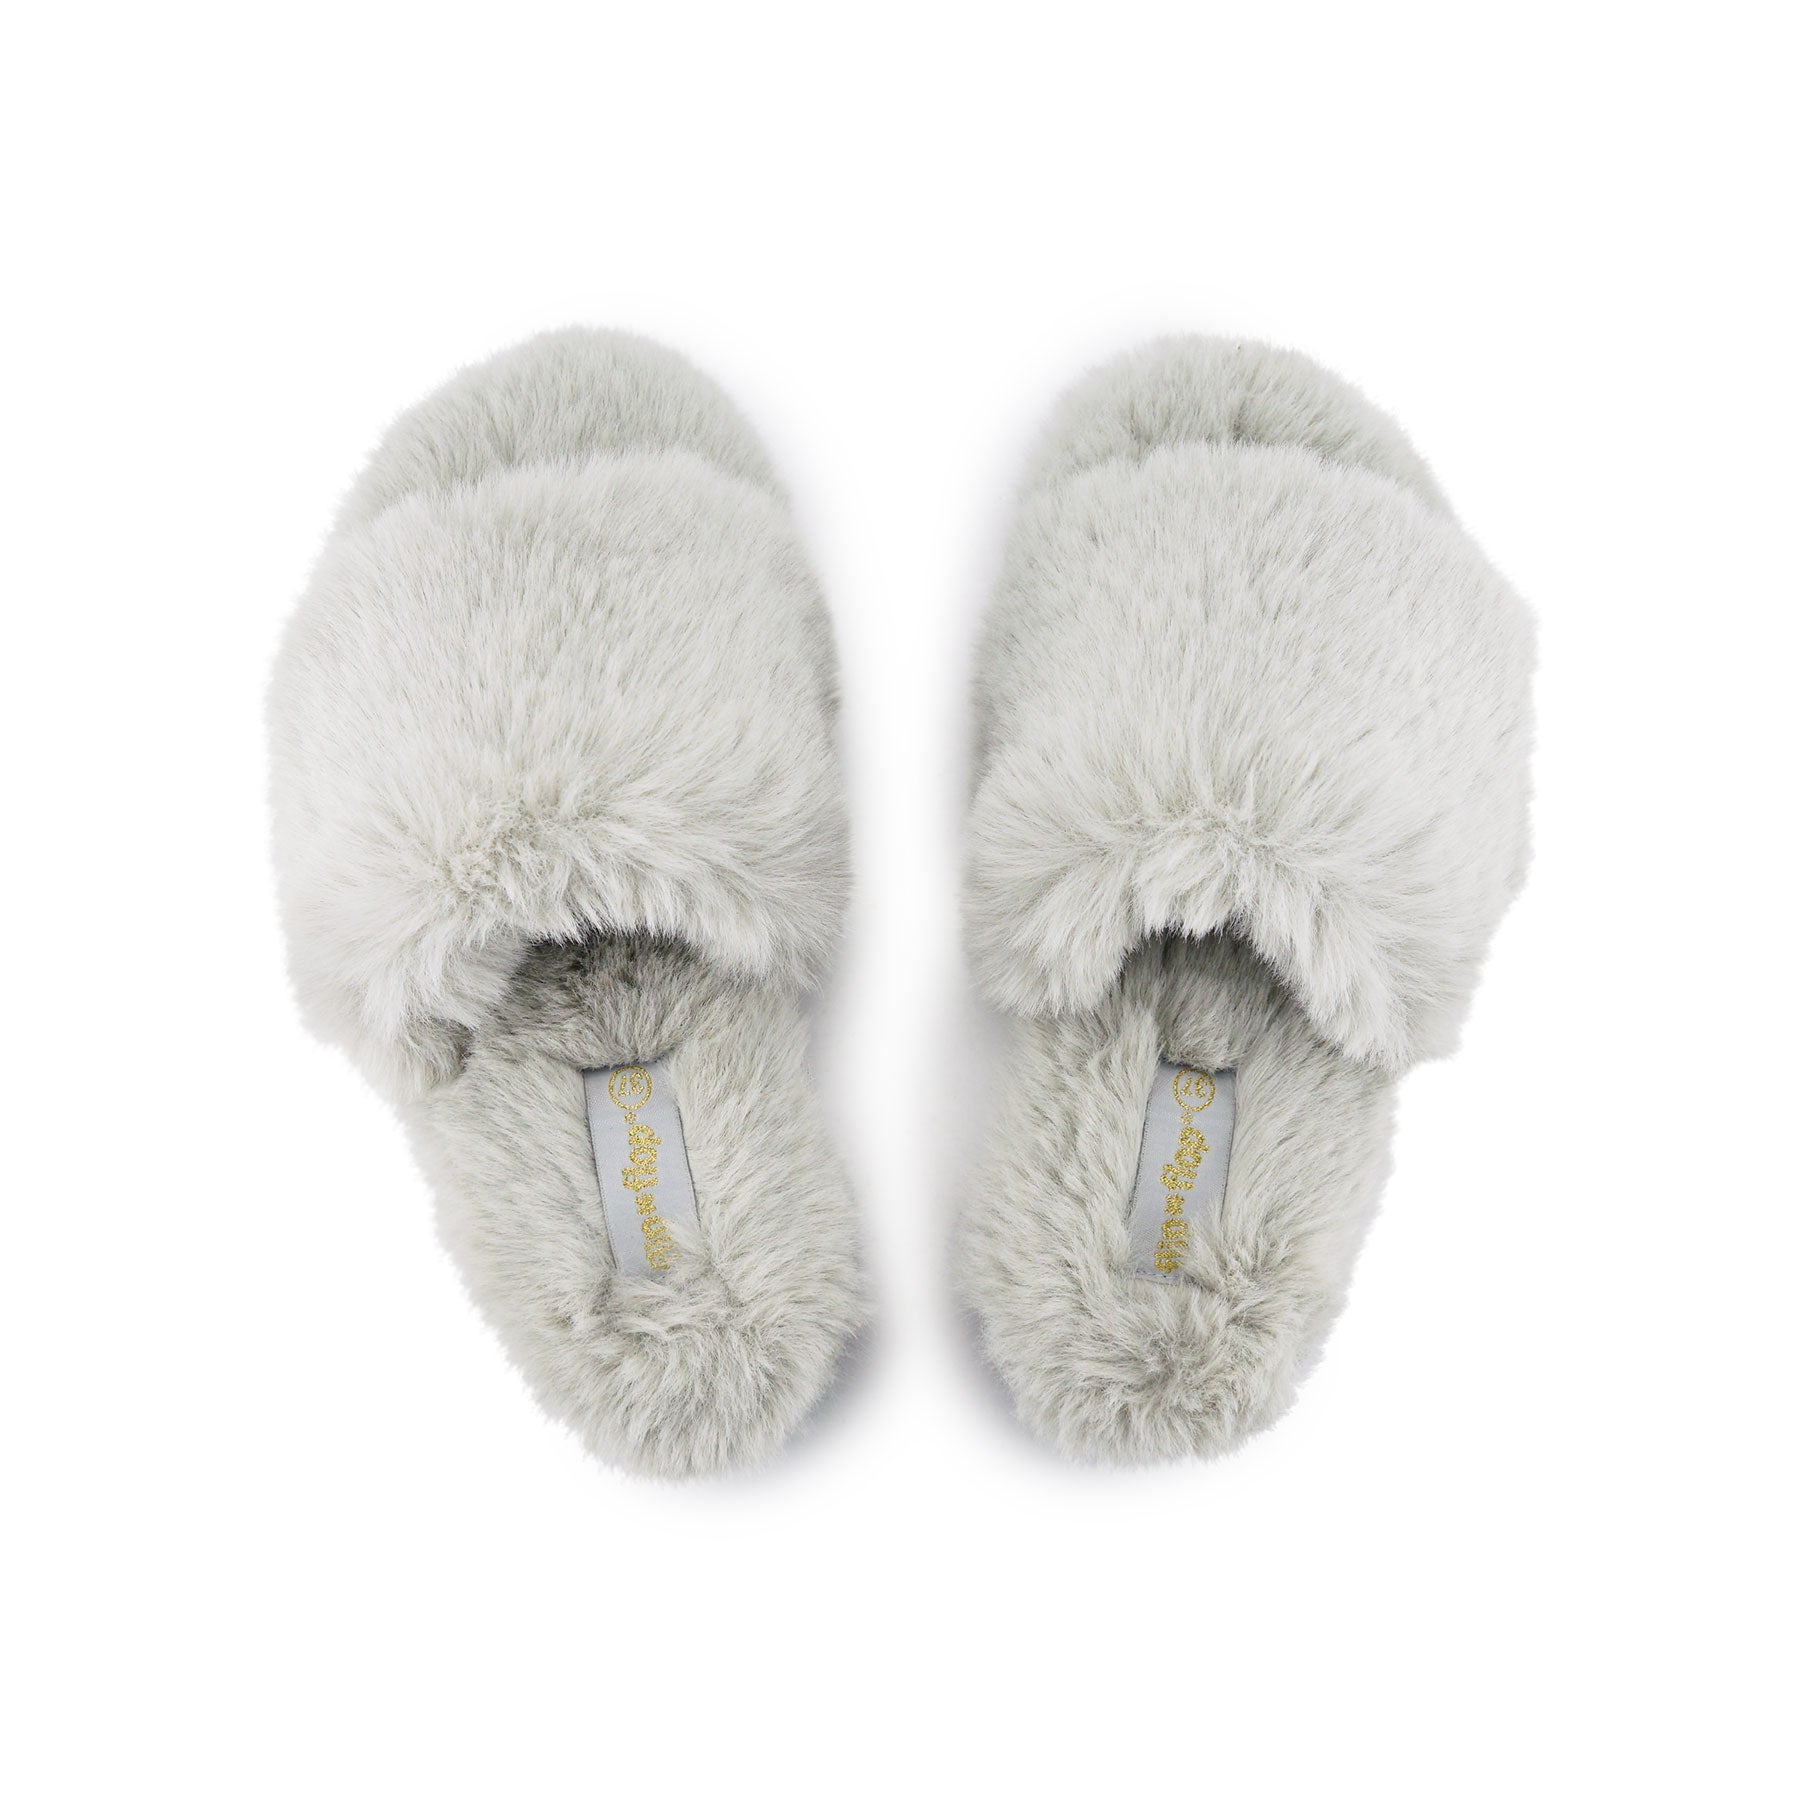 Slippers vegan with Fur in color grey by Flip*Flop